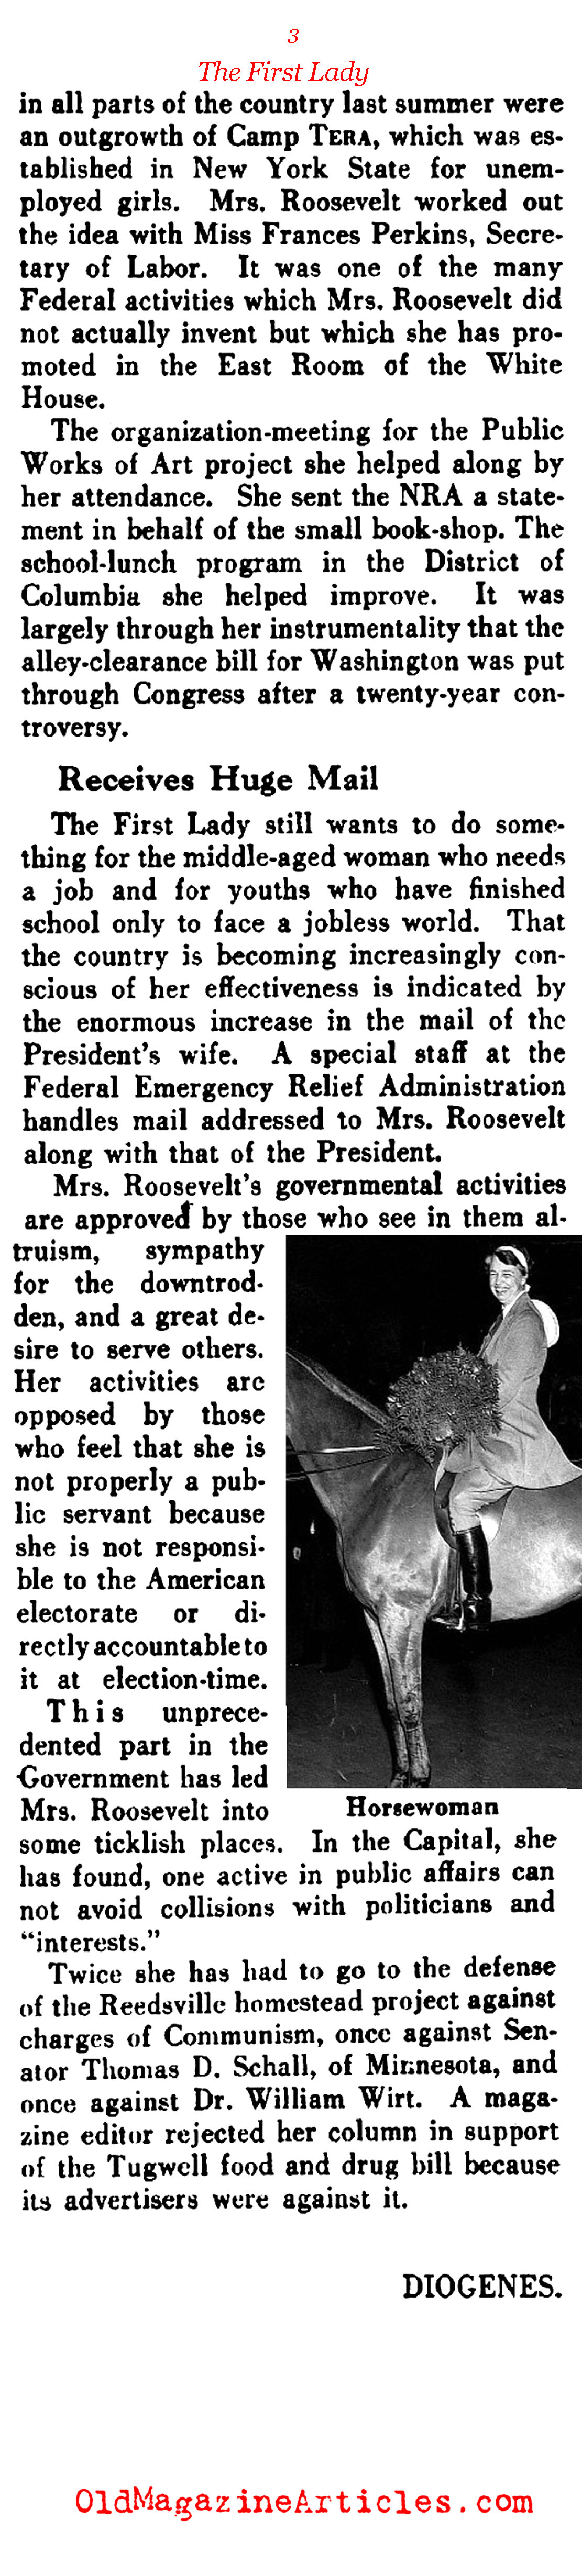 Eleanor Roosevelt Was a Very Different First Lady  (The Literary Digest, 1933)